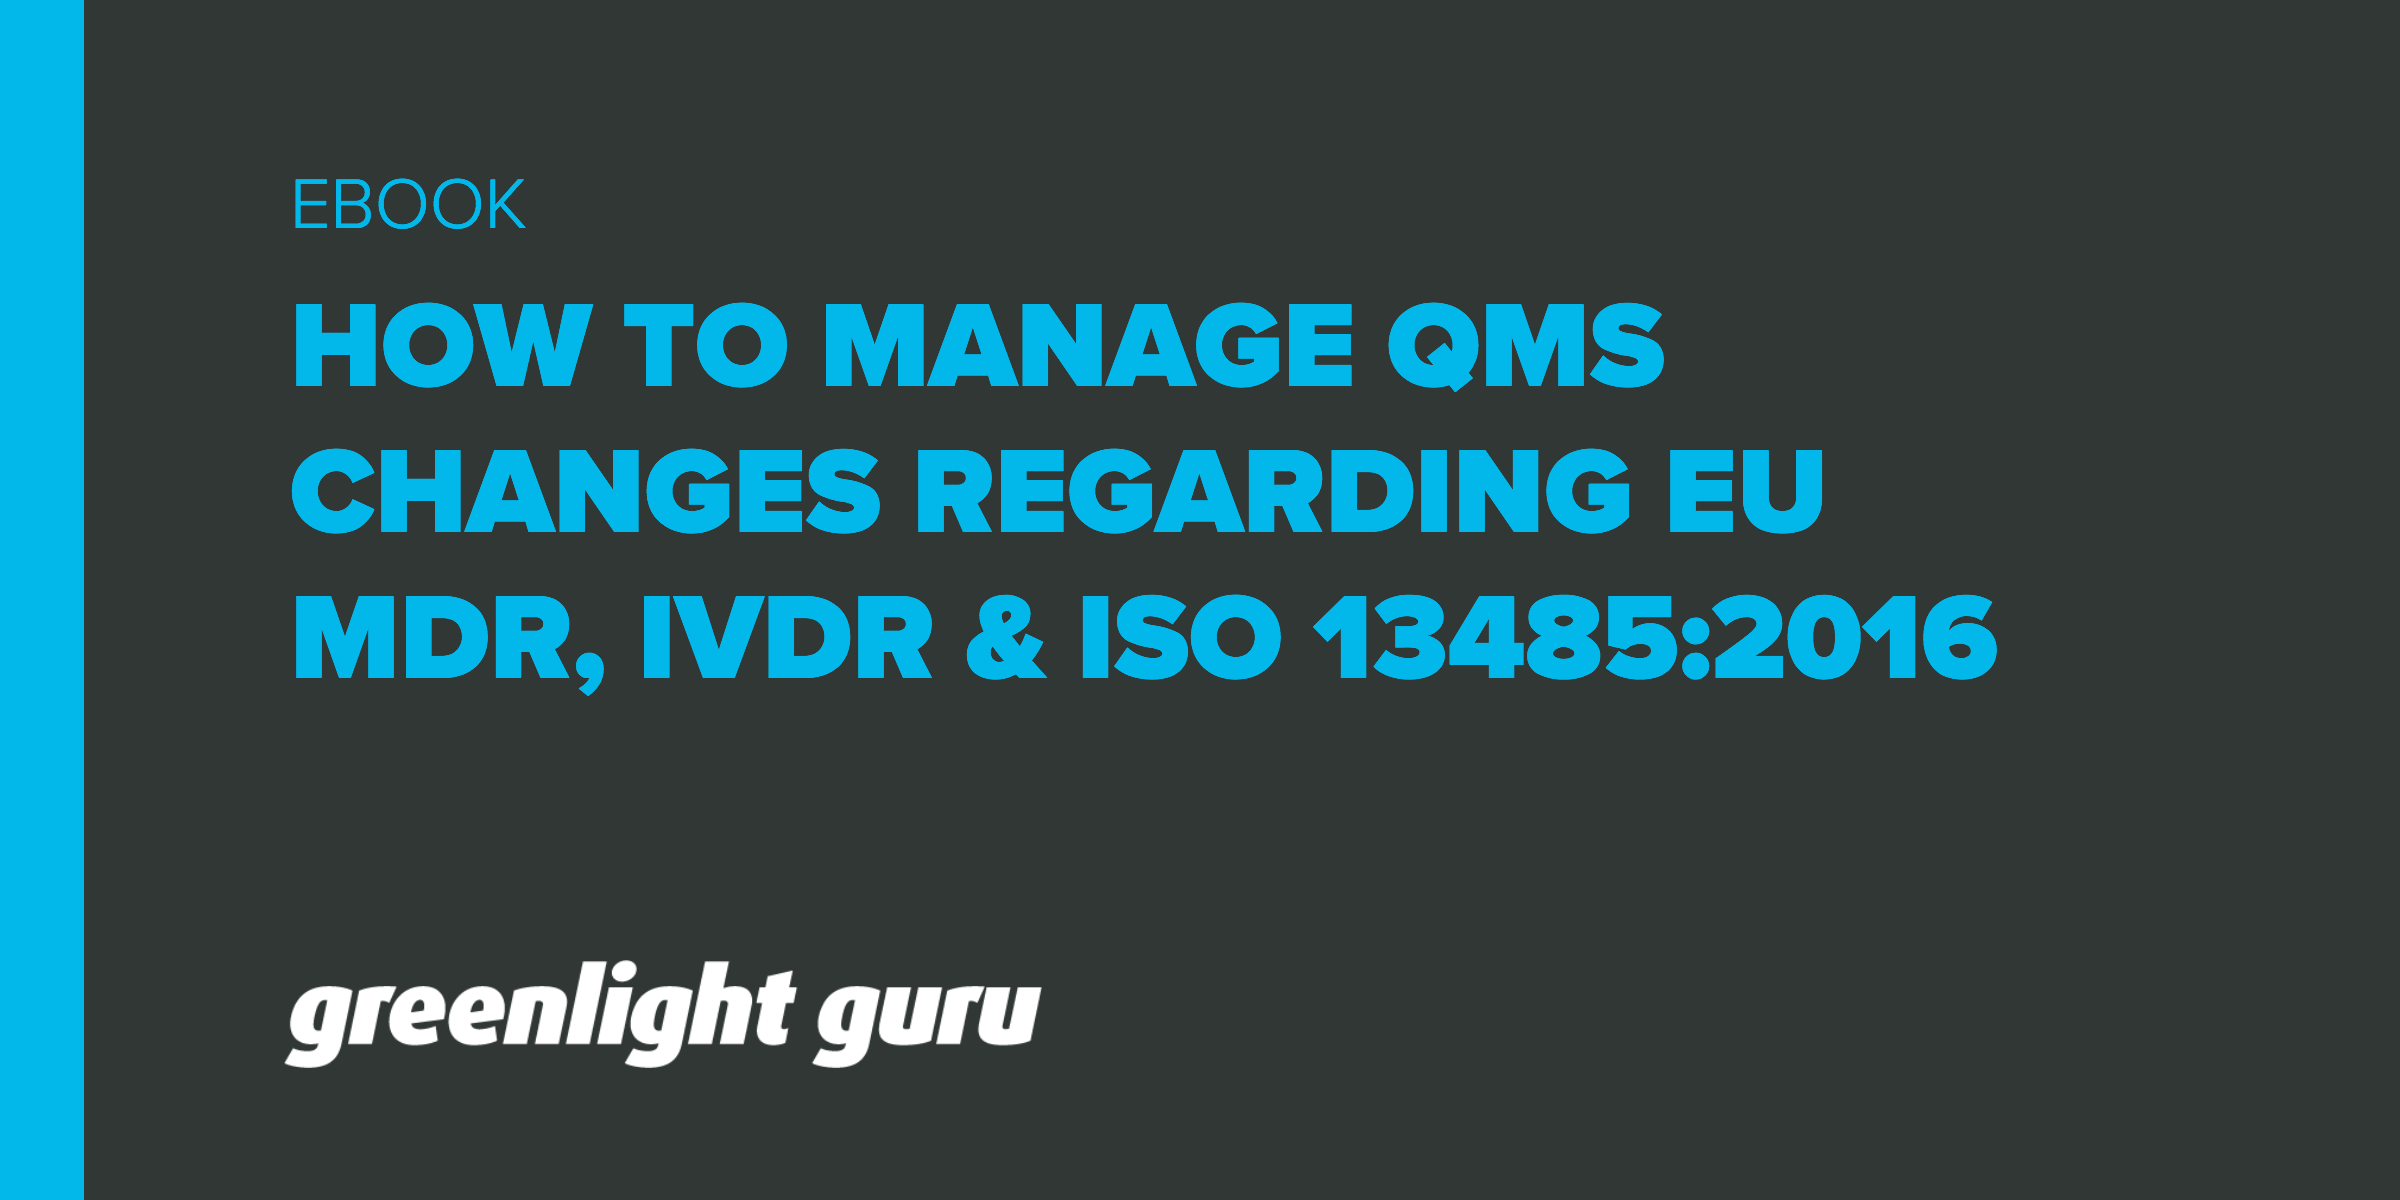 Medical Device Qms Changes How To Manage Changes Regarding Eu Mdr Ivdr Iso 16